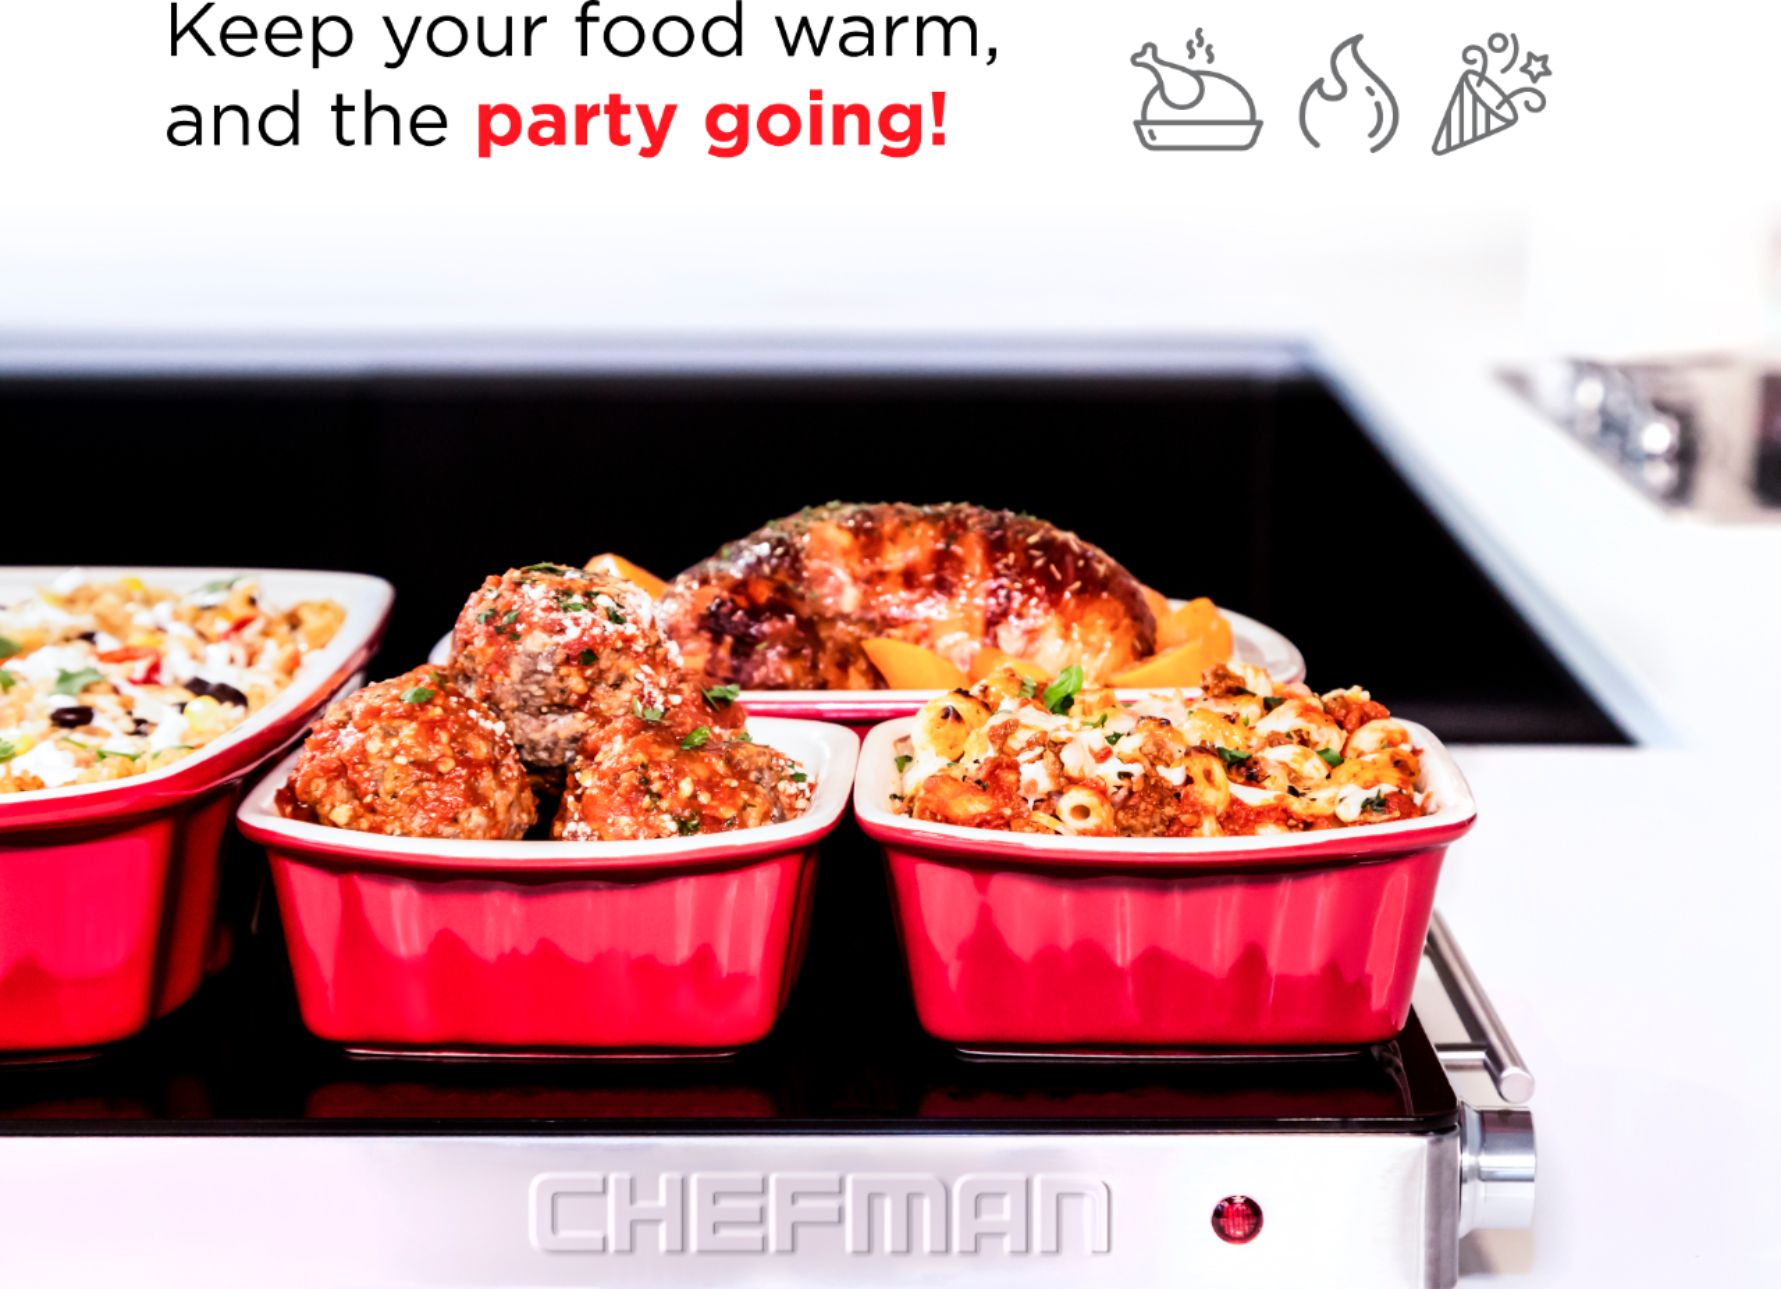 ✓ Top 5 Best Warming Trays  Food Warmer Trays review 